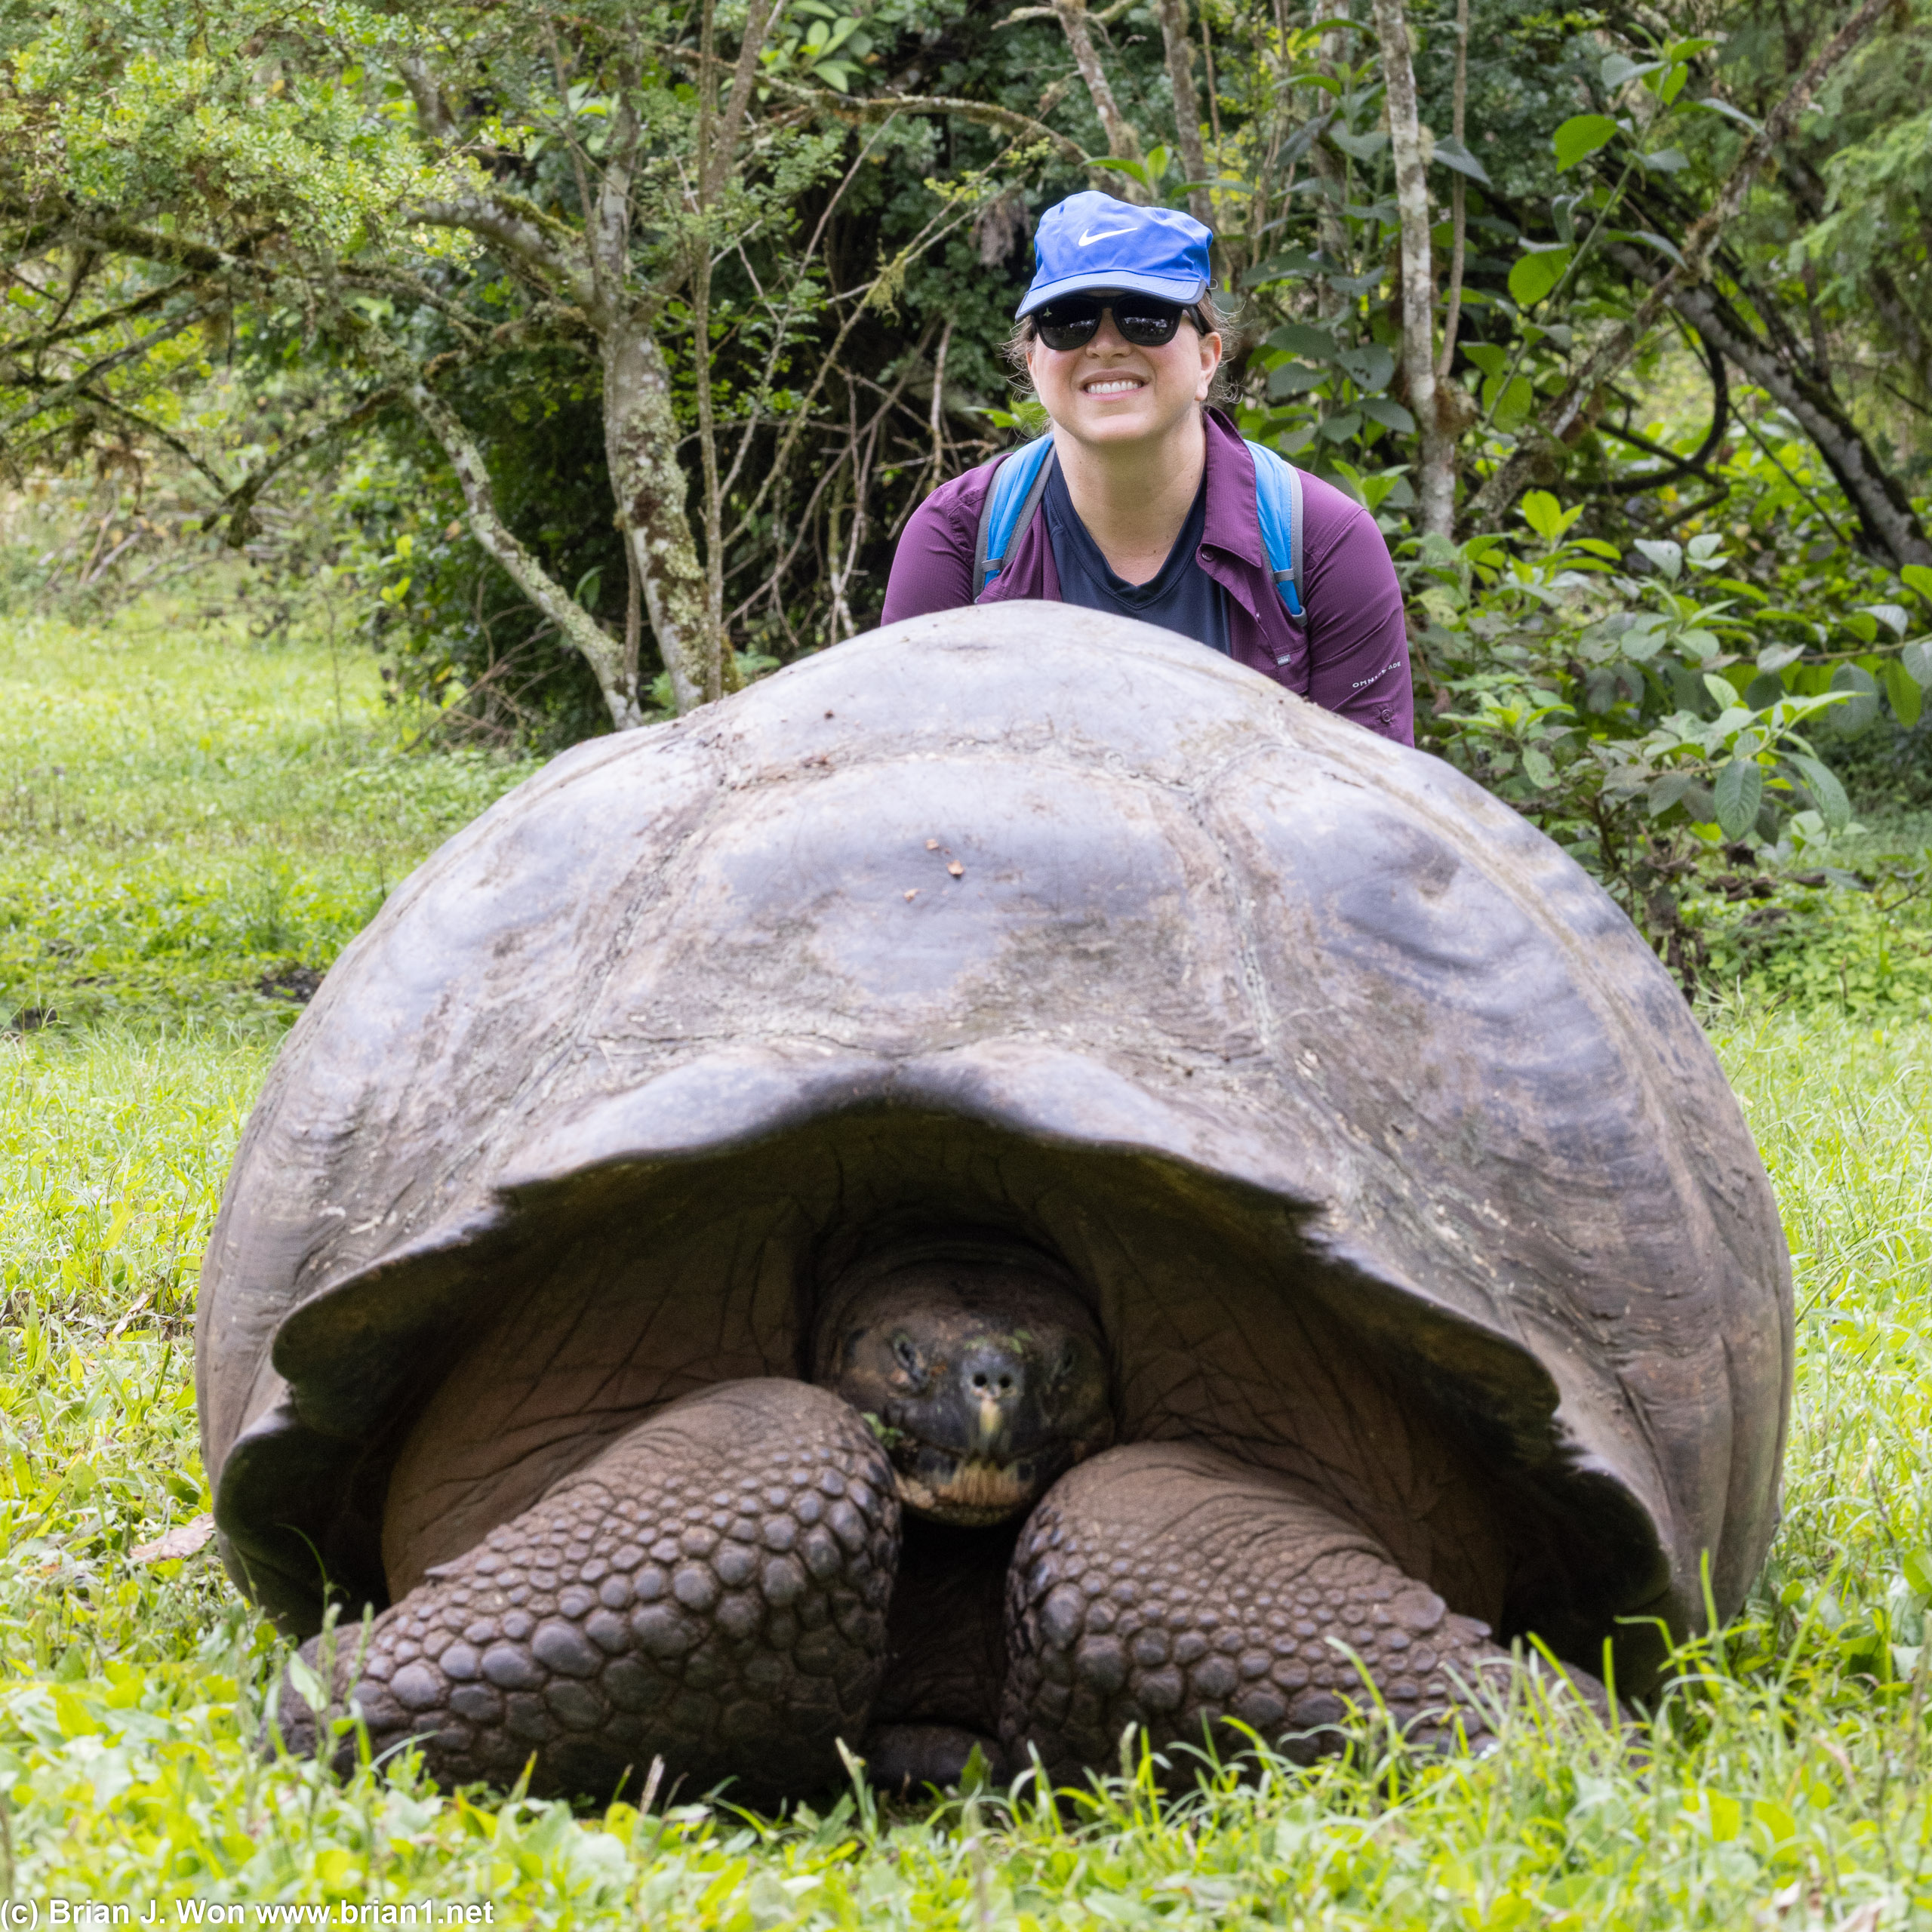 Humans finding time to pose with giant tortoises.